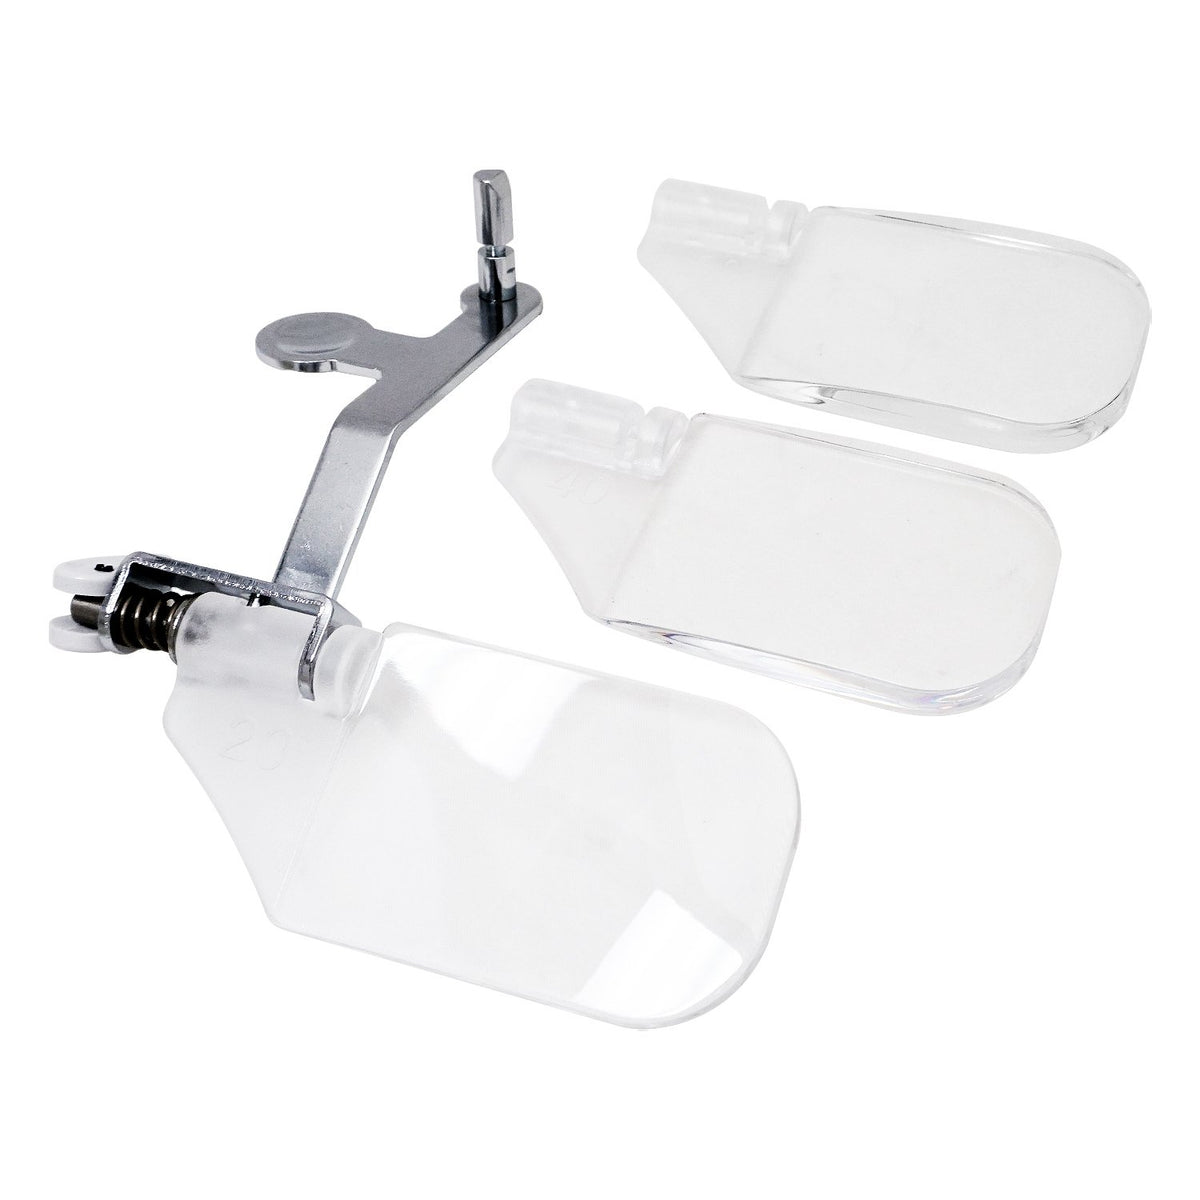 Janome Acuview Optic magnifiers set with 20x, 40x, 60x lenses